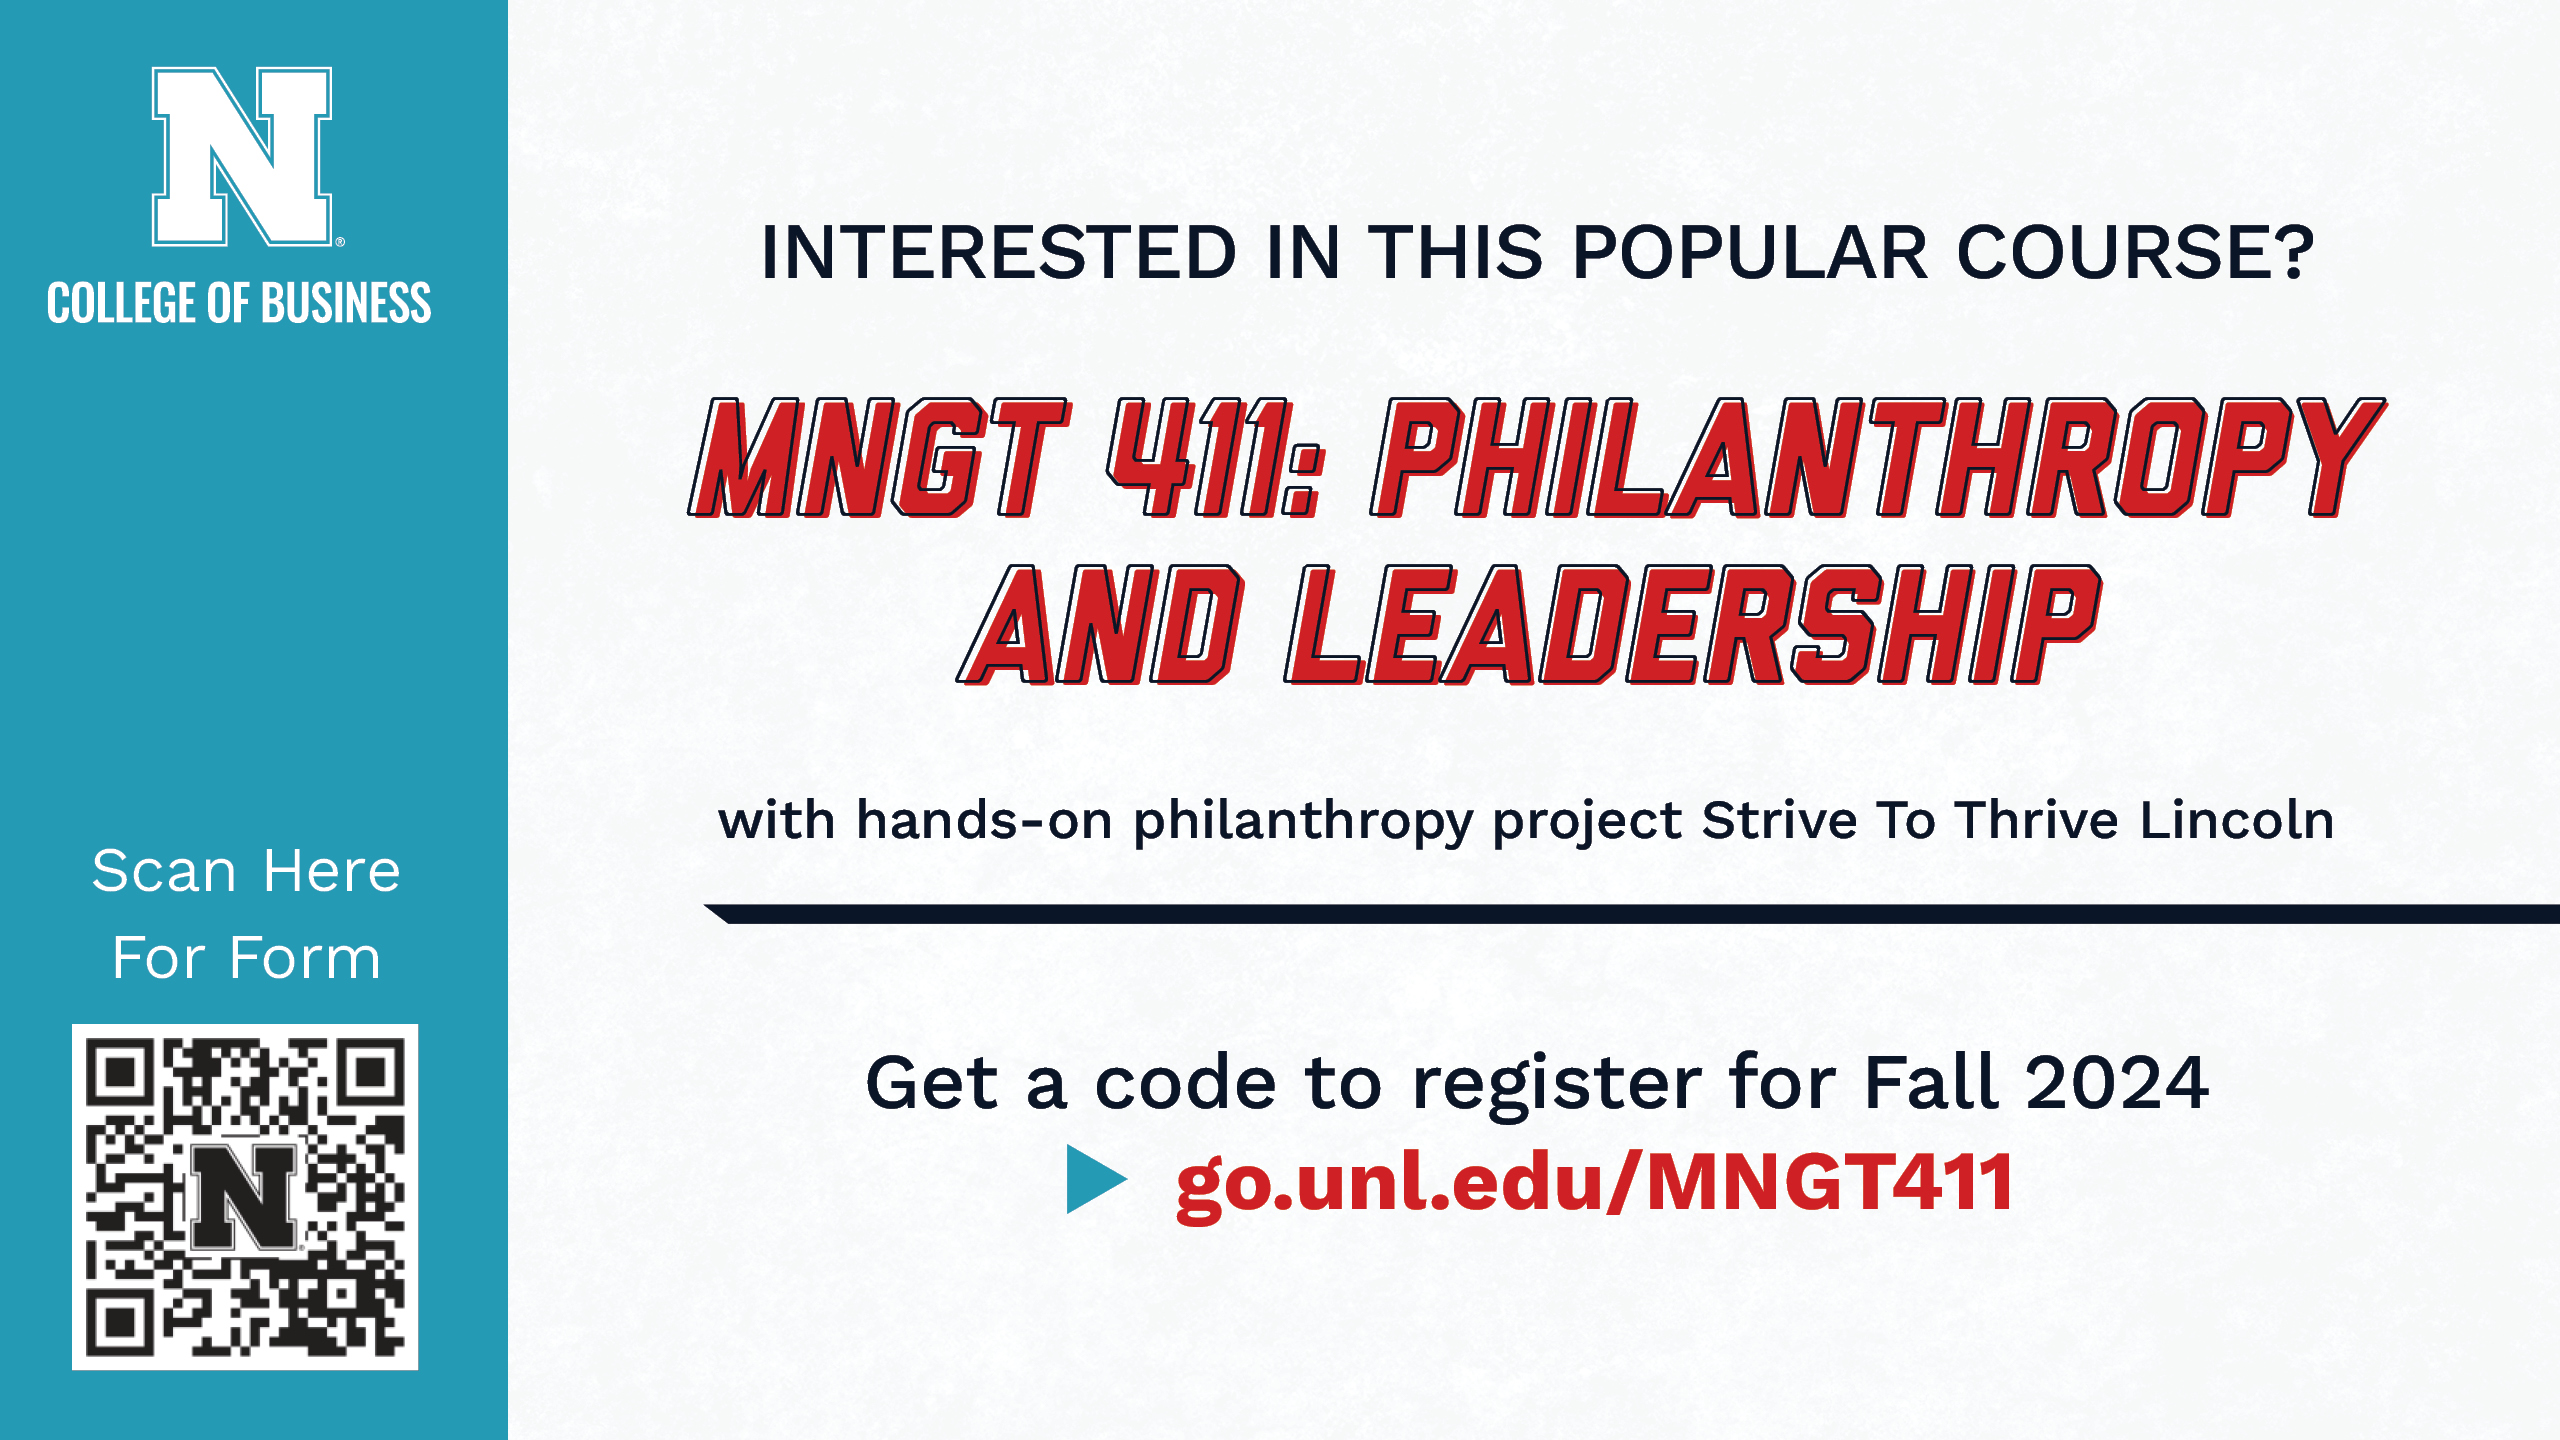 MNGT 411 - Philanthropy and Leadership